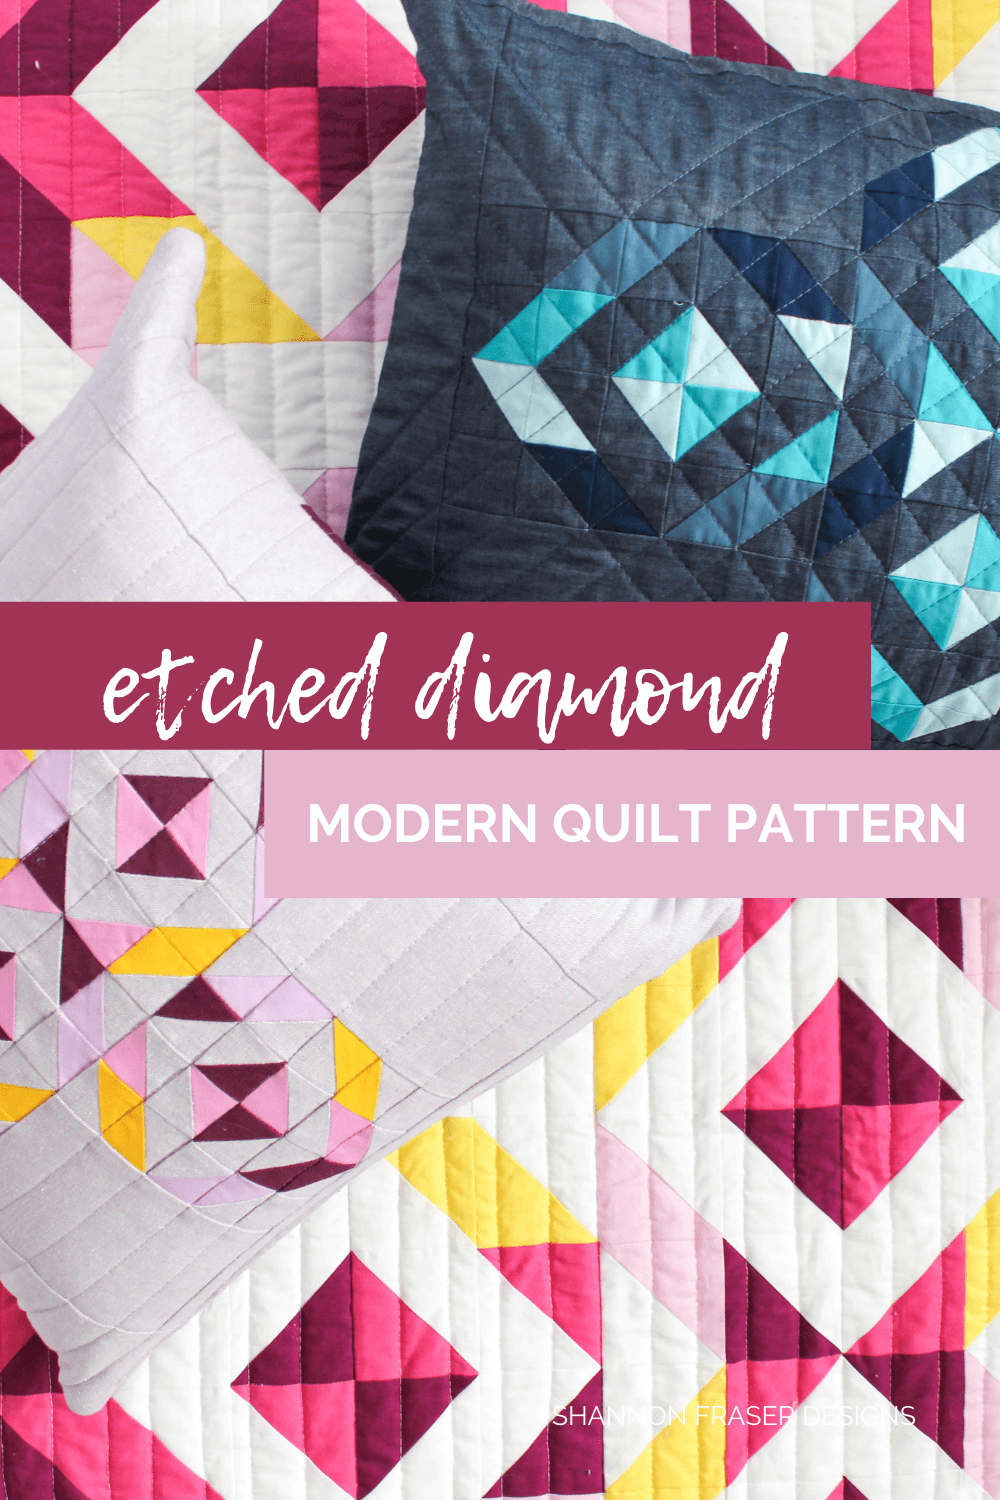 Etched Diamond Pillow Pattern by Shannon Fraser Designs is a beginner friendly pattern that can be whipped up in an afternoon! Includes step by step instructions for both a square pillow 18"x18" and a lumbar pillow 23"x15". #quiltedpillow #quilting #cushions